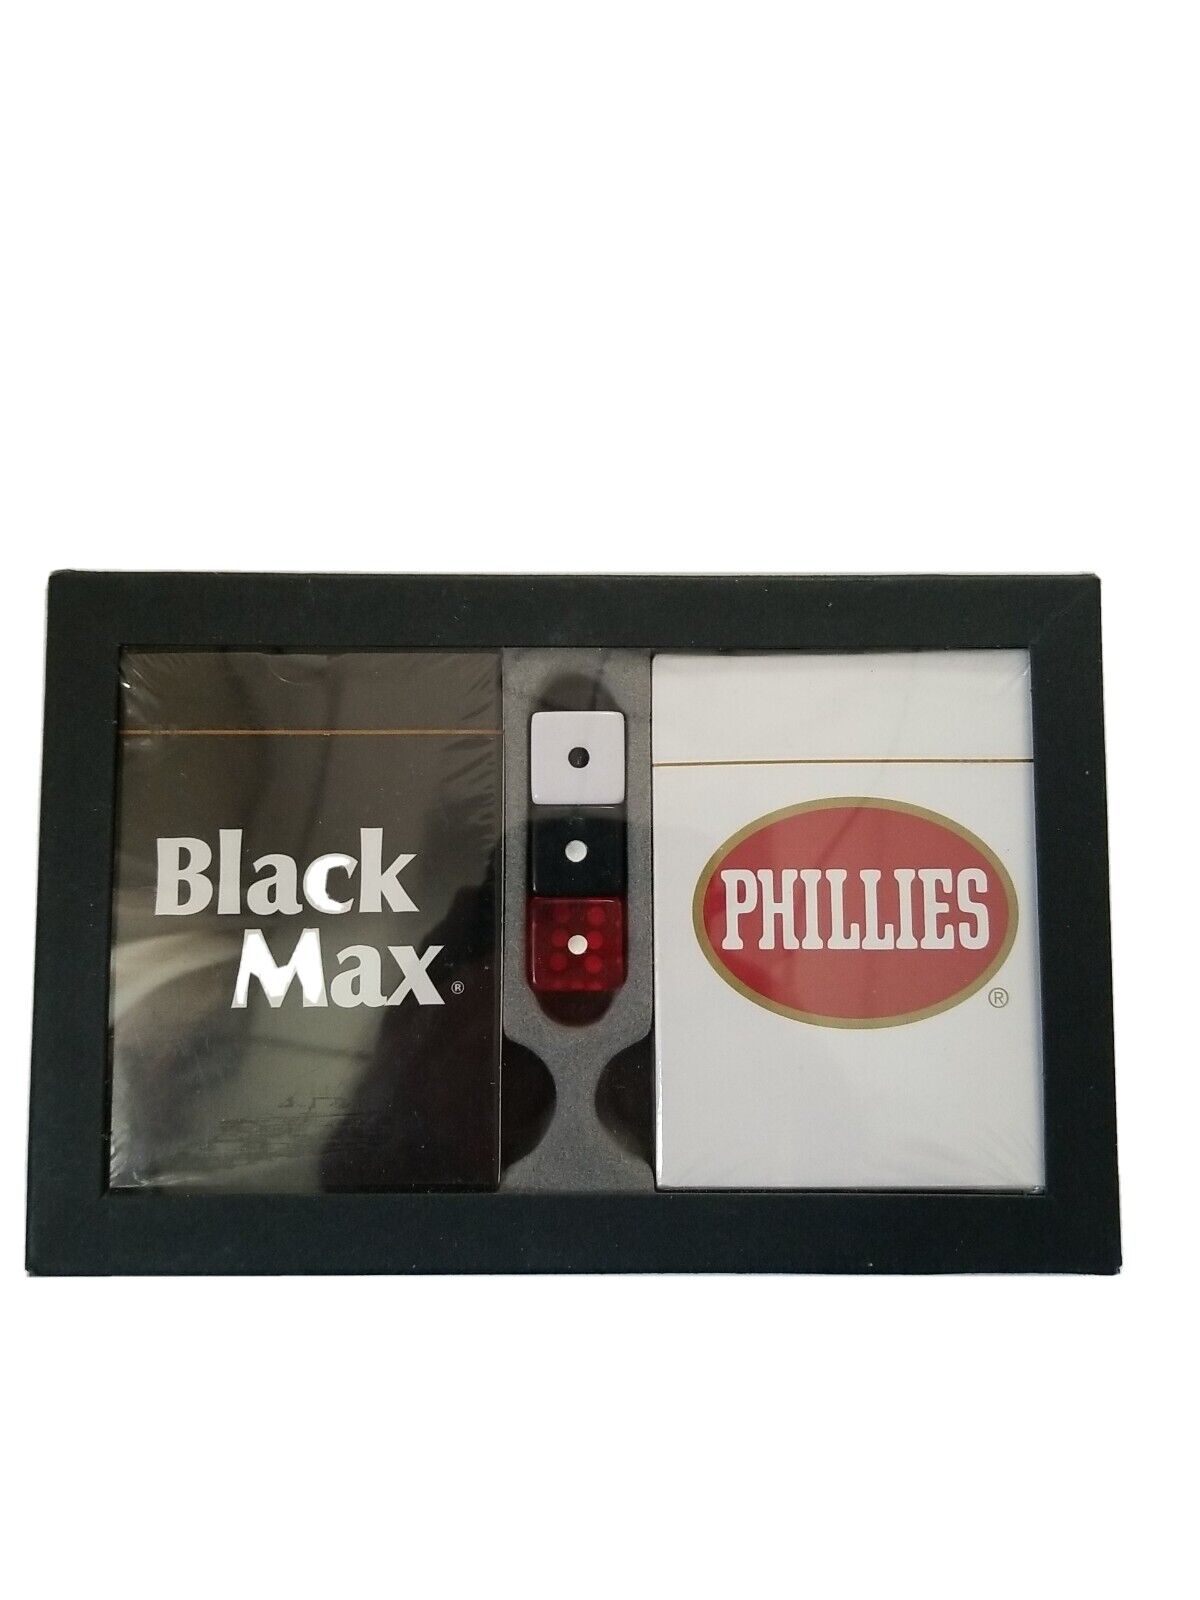 2DECKS BLACK MAX PHILLIES  CIGARS 3 DIFFERENT COLOR DICE PLAYING CARDS 